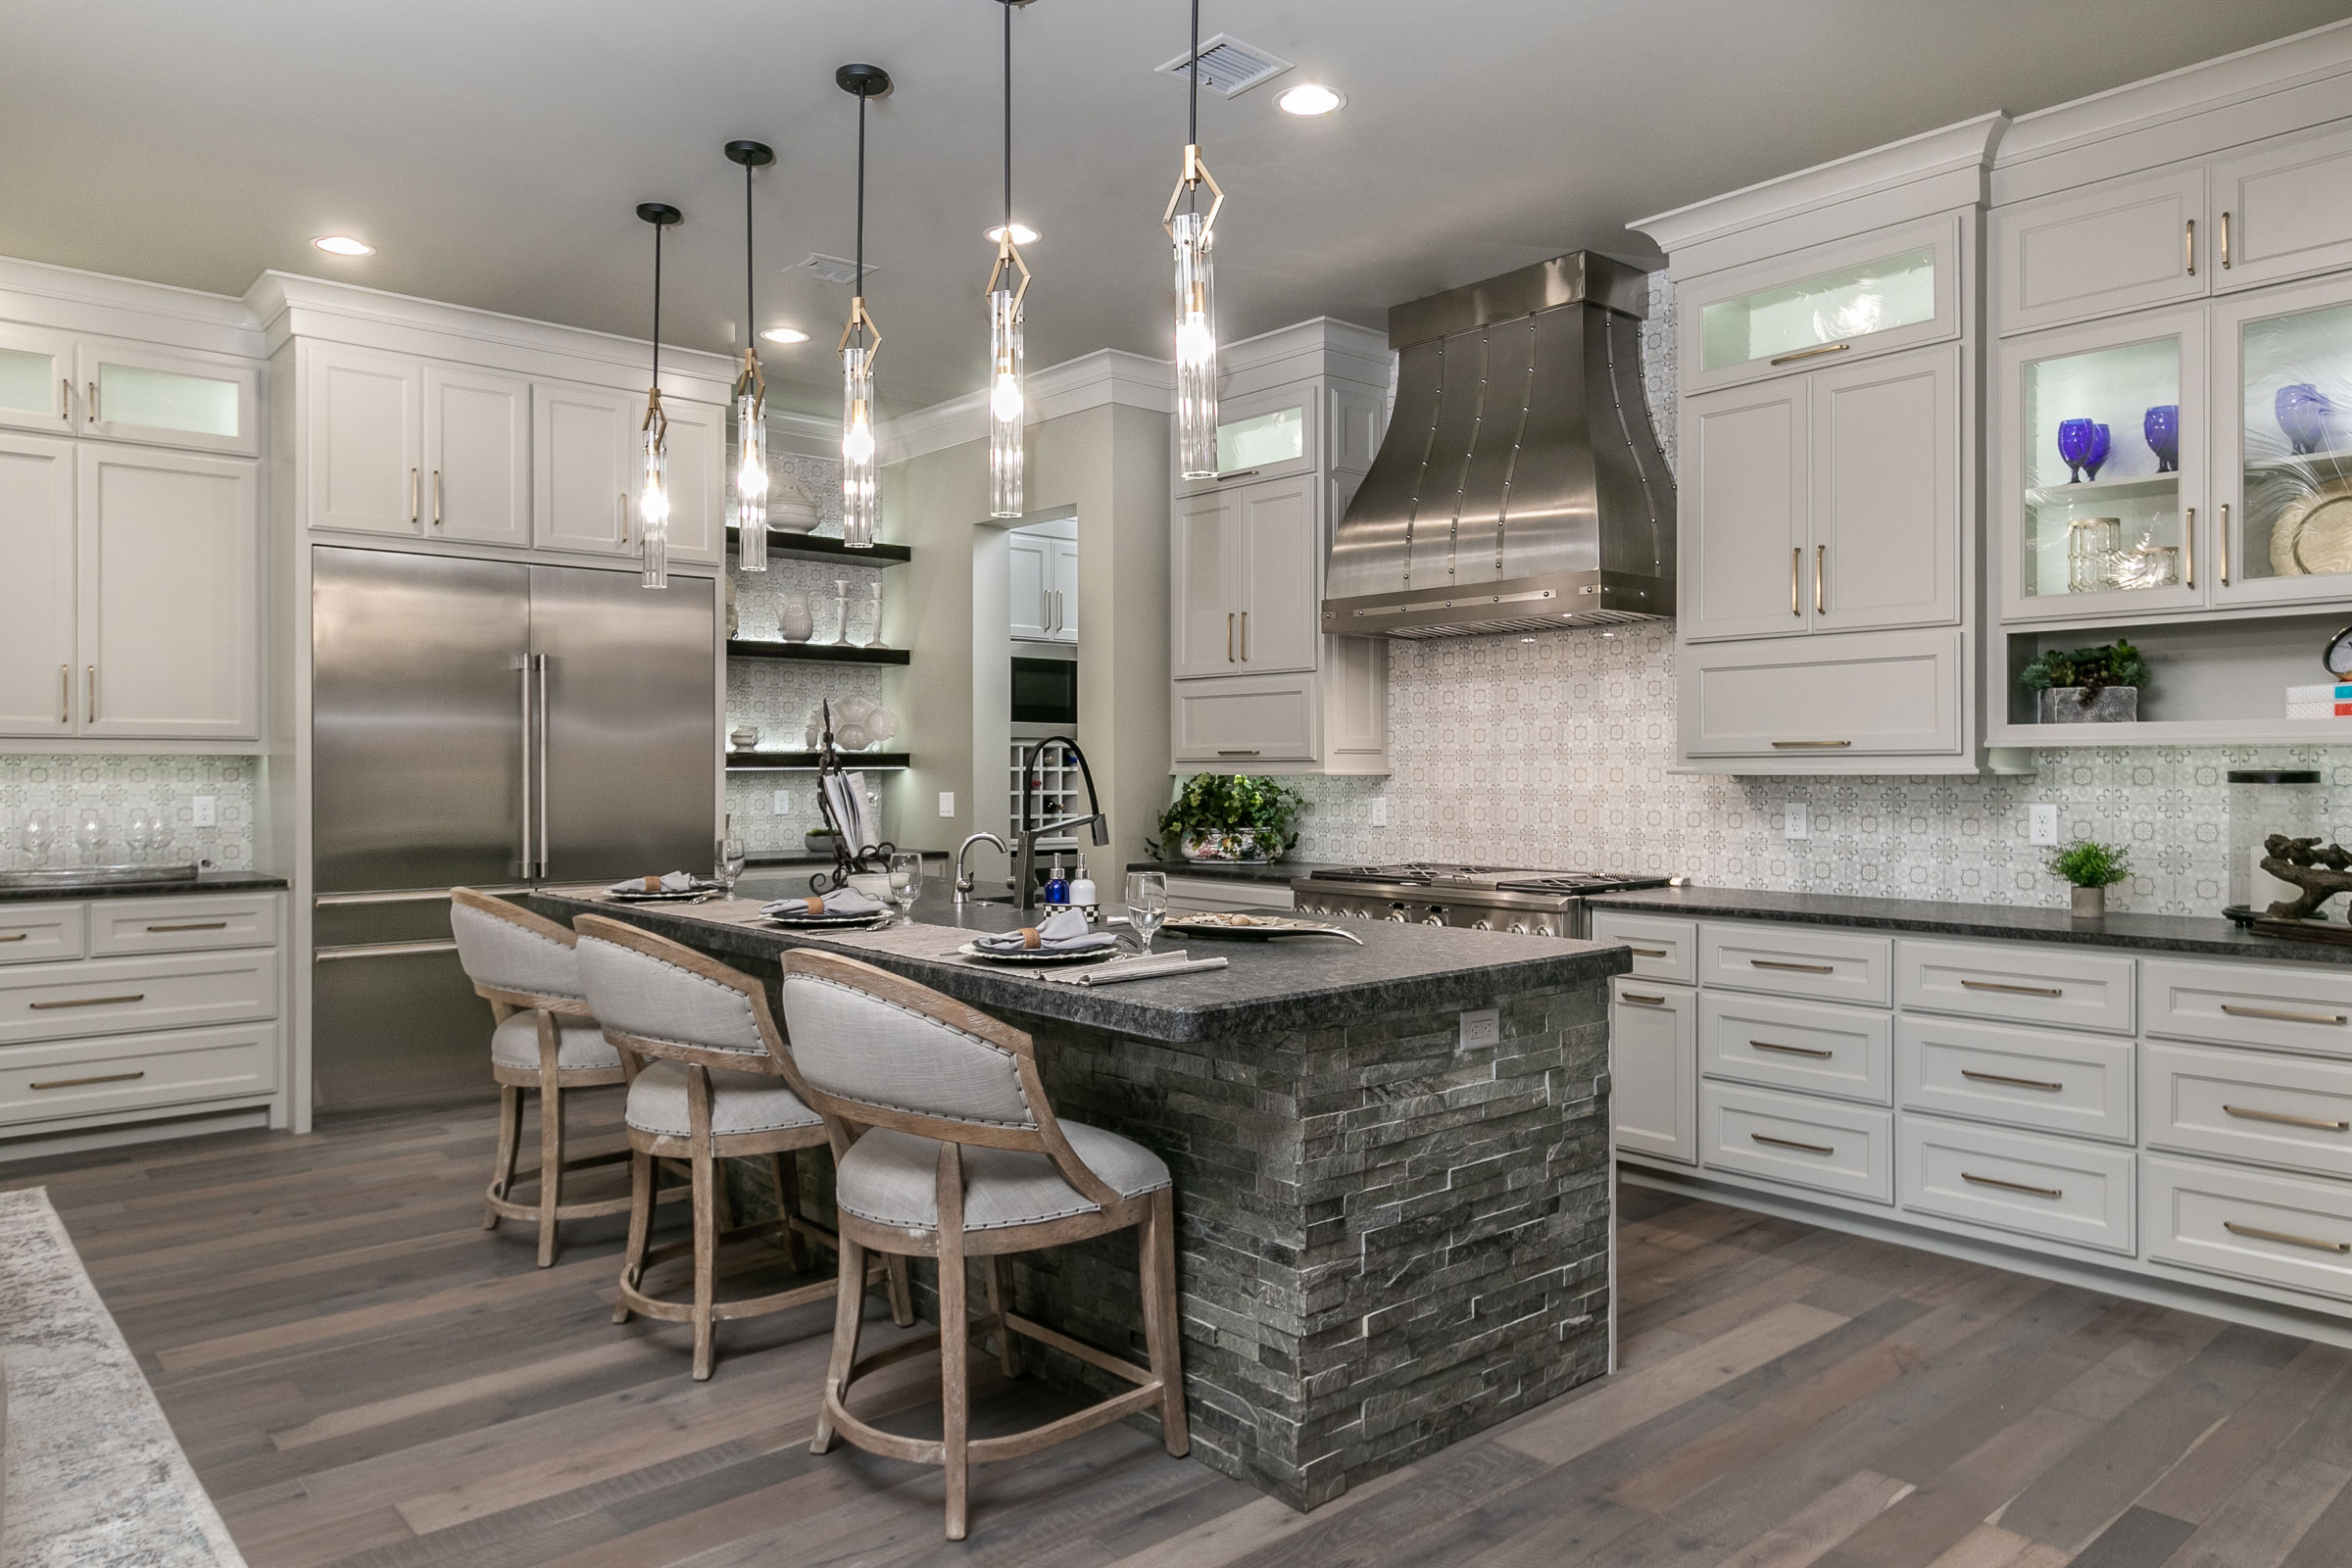 Classic kitchen planning,featuring elegant white kitchen cabinets that perfectly complement the luxurious marble kitchen countertops